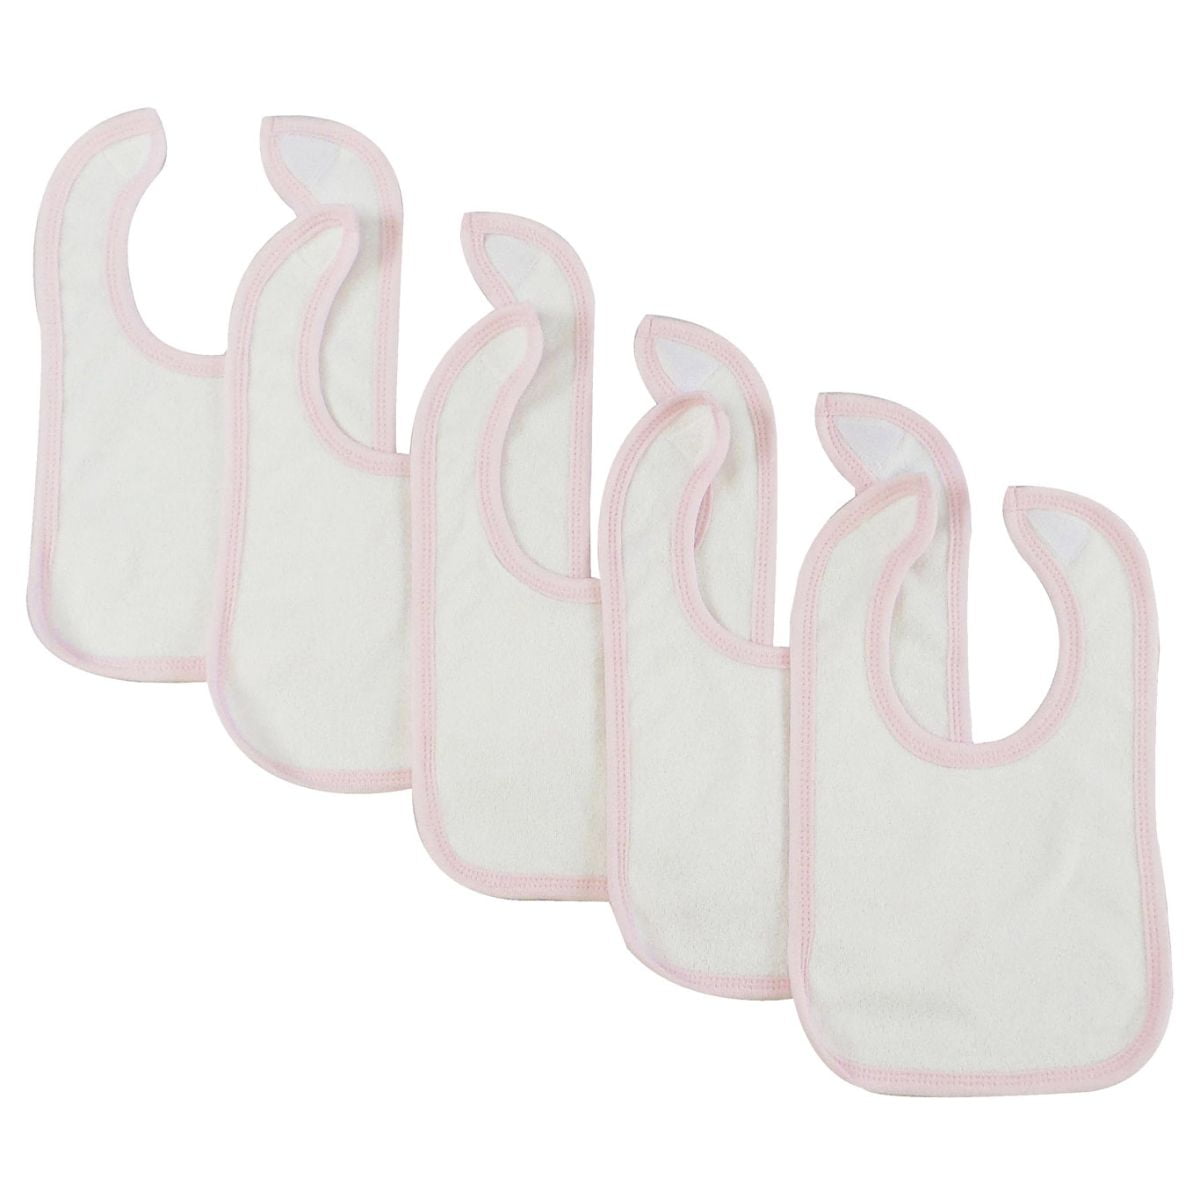 12.25 X 7.5 In. Infant Bib, White & Pink - Pack Of 5